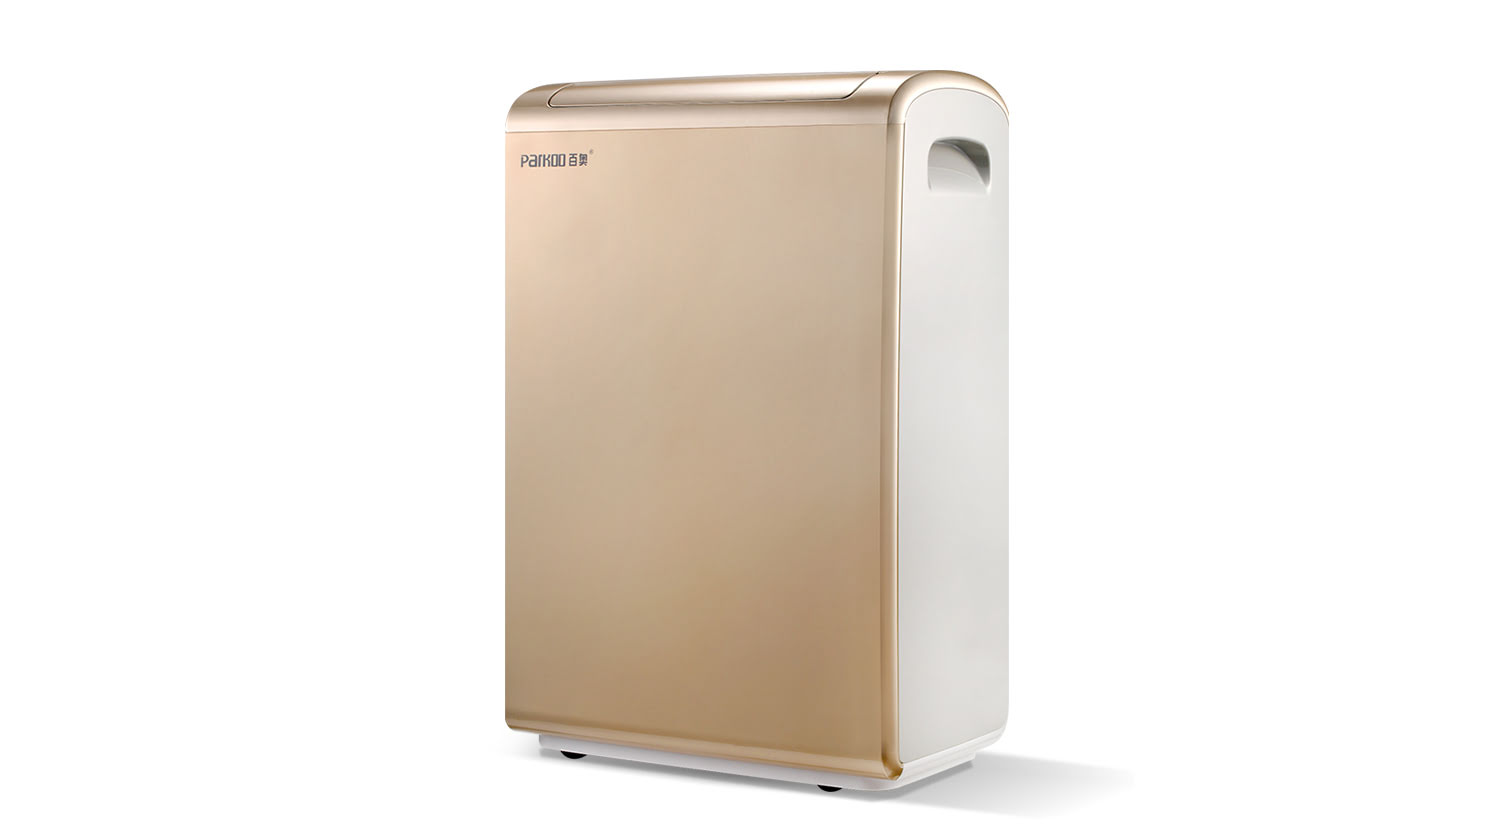 Office dehumidifier, dehumidification solution for office spaces